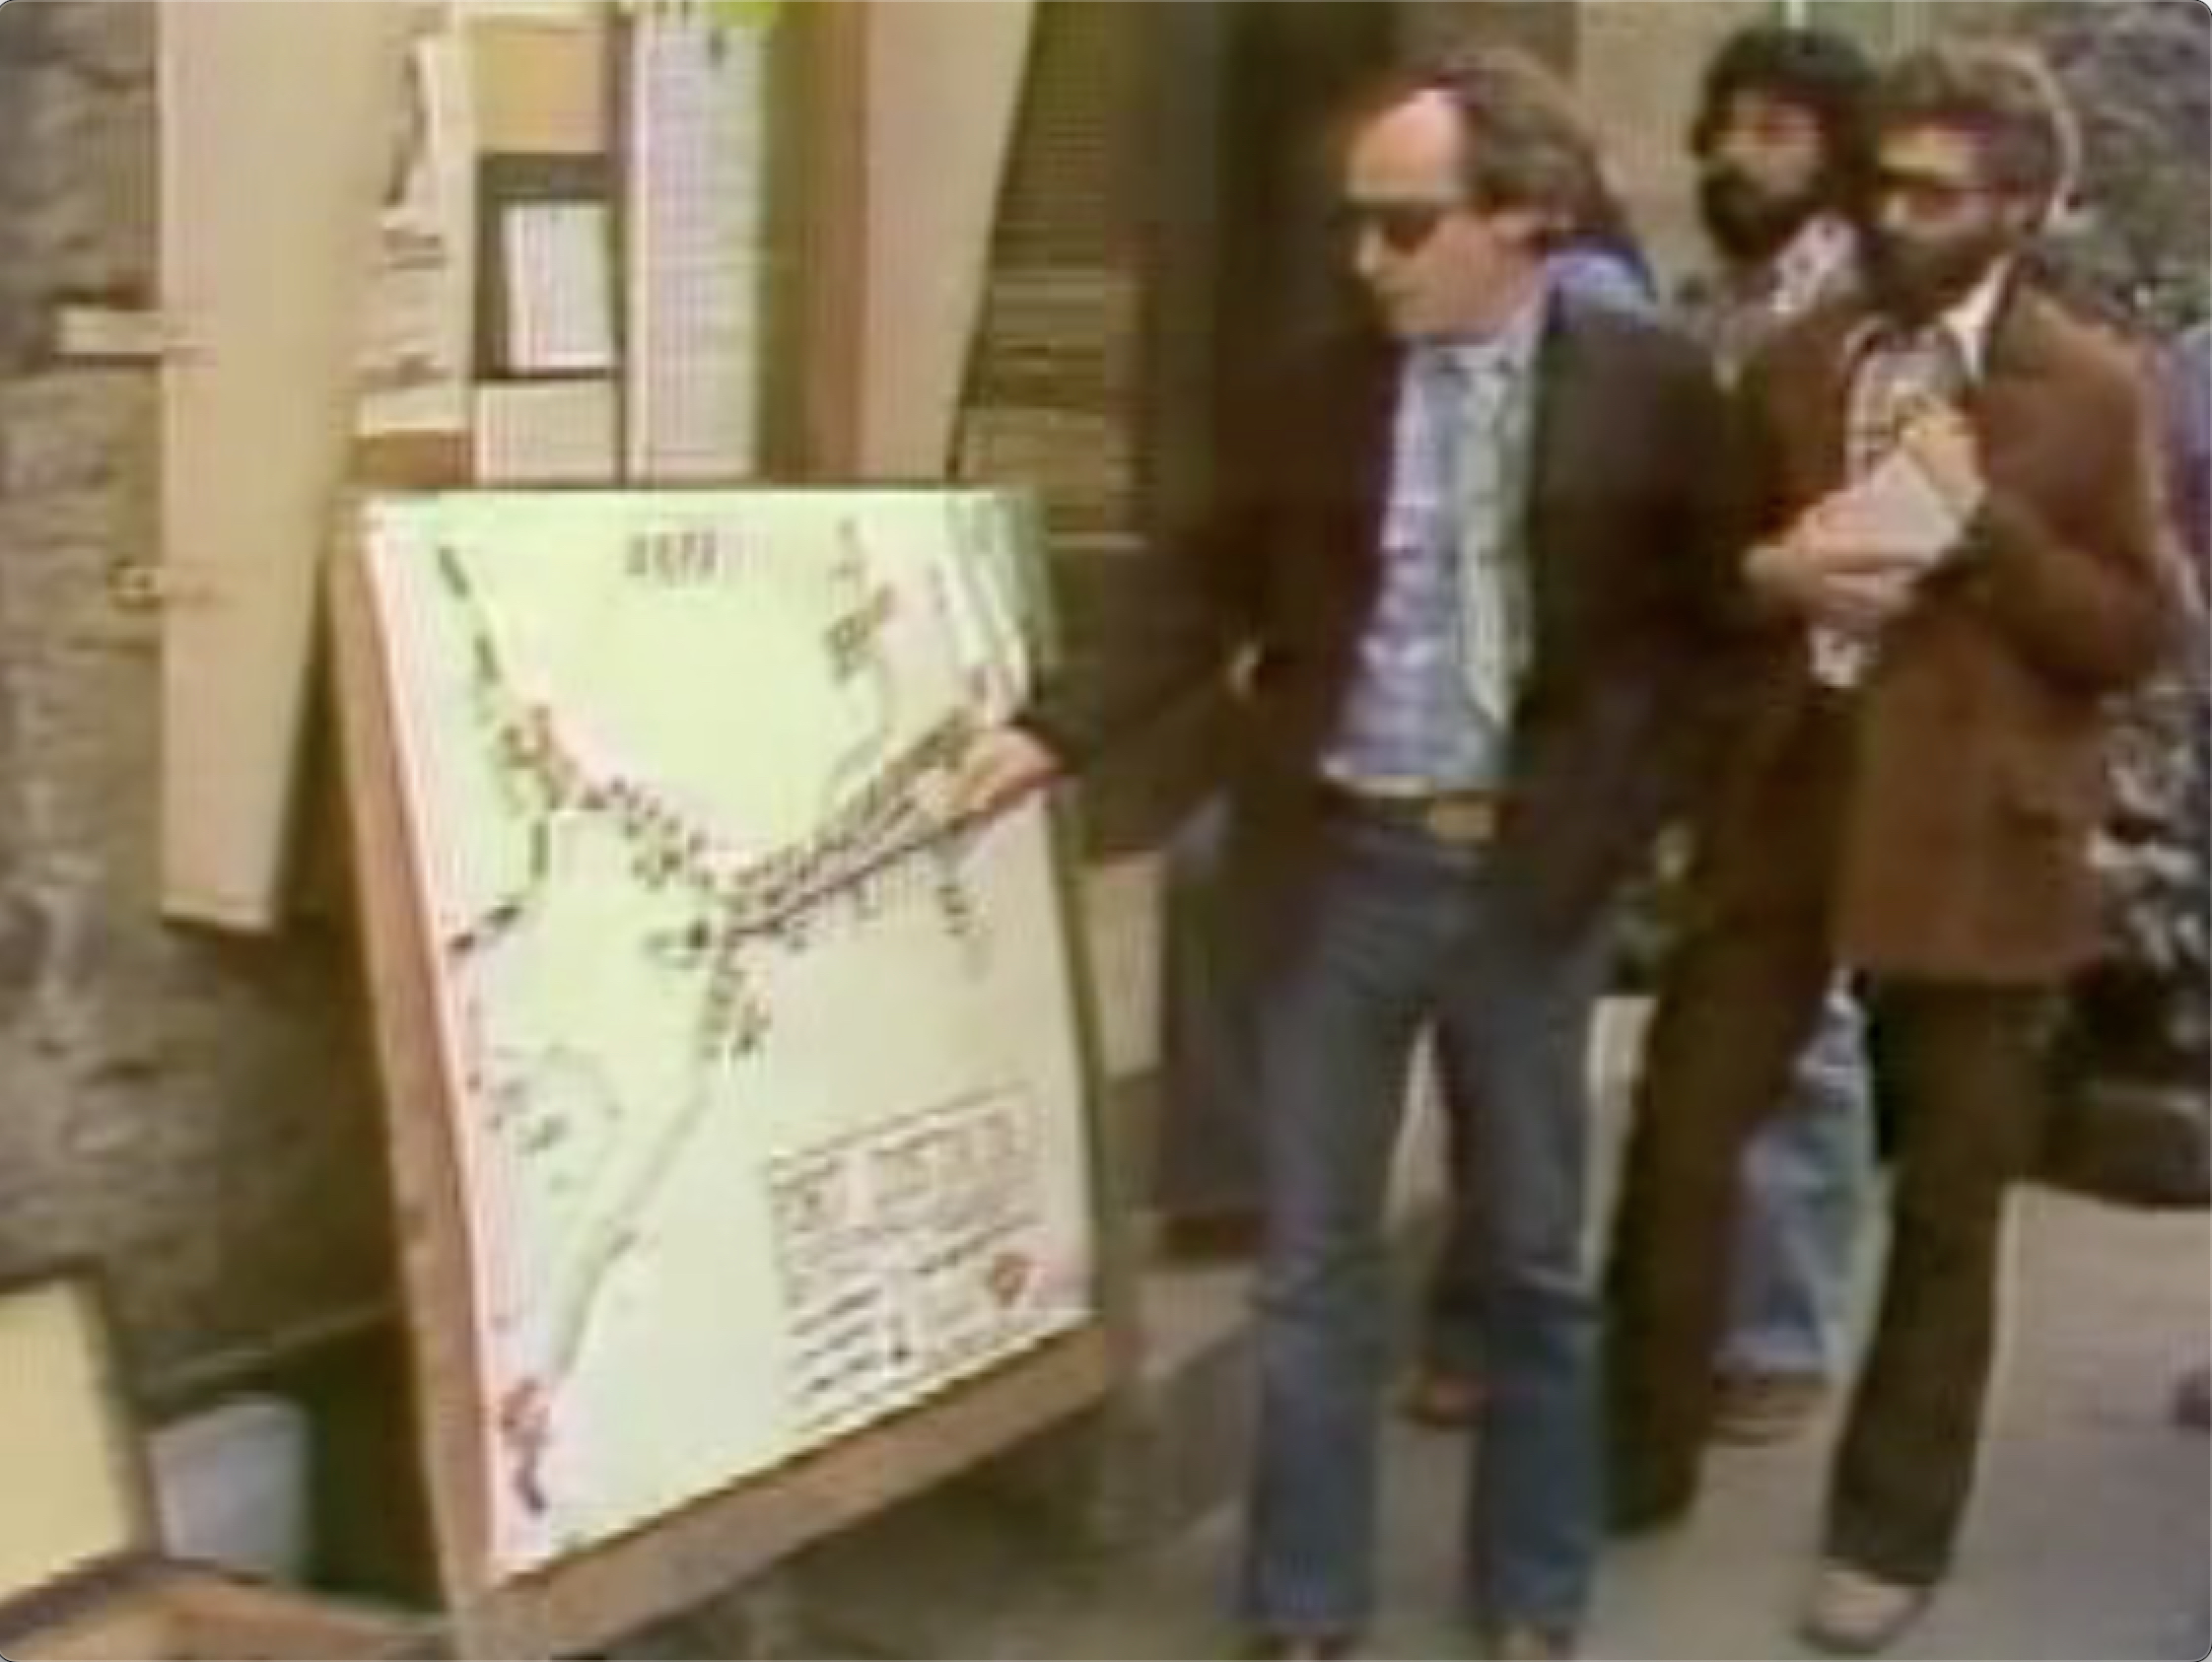 Color video still of three men in standing to the right of a map placed on a sandwich board. One man, wearing a suitcoat and sunglasses, is using a pointer to indicate something on the map.